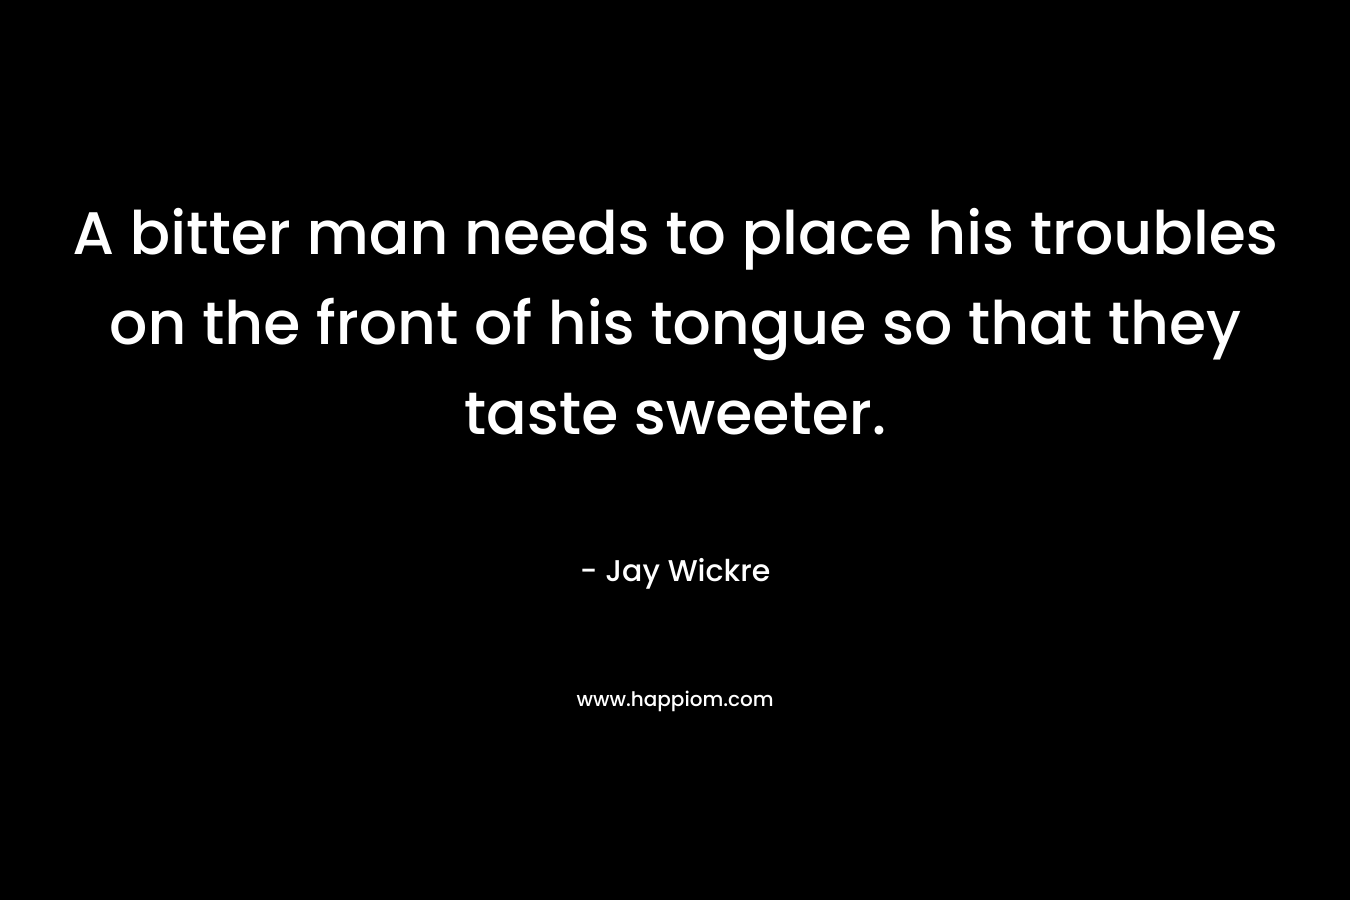 A bitter man needs to place his troubles on the front of his tongue so that they taste sweeter.